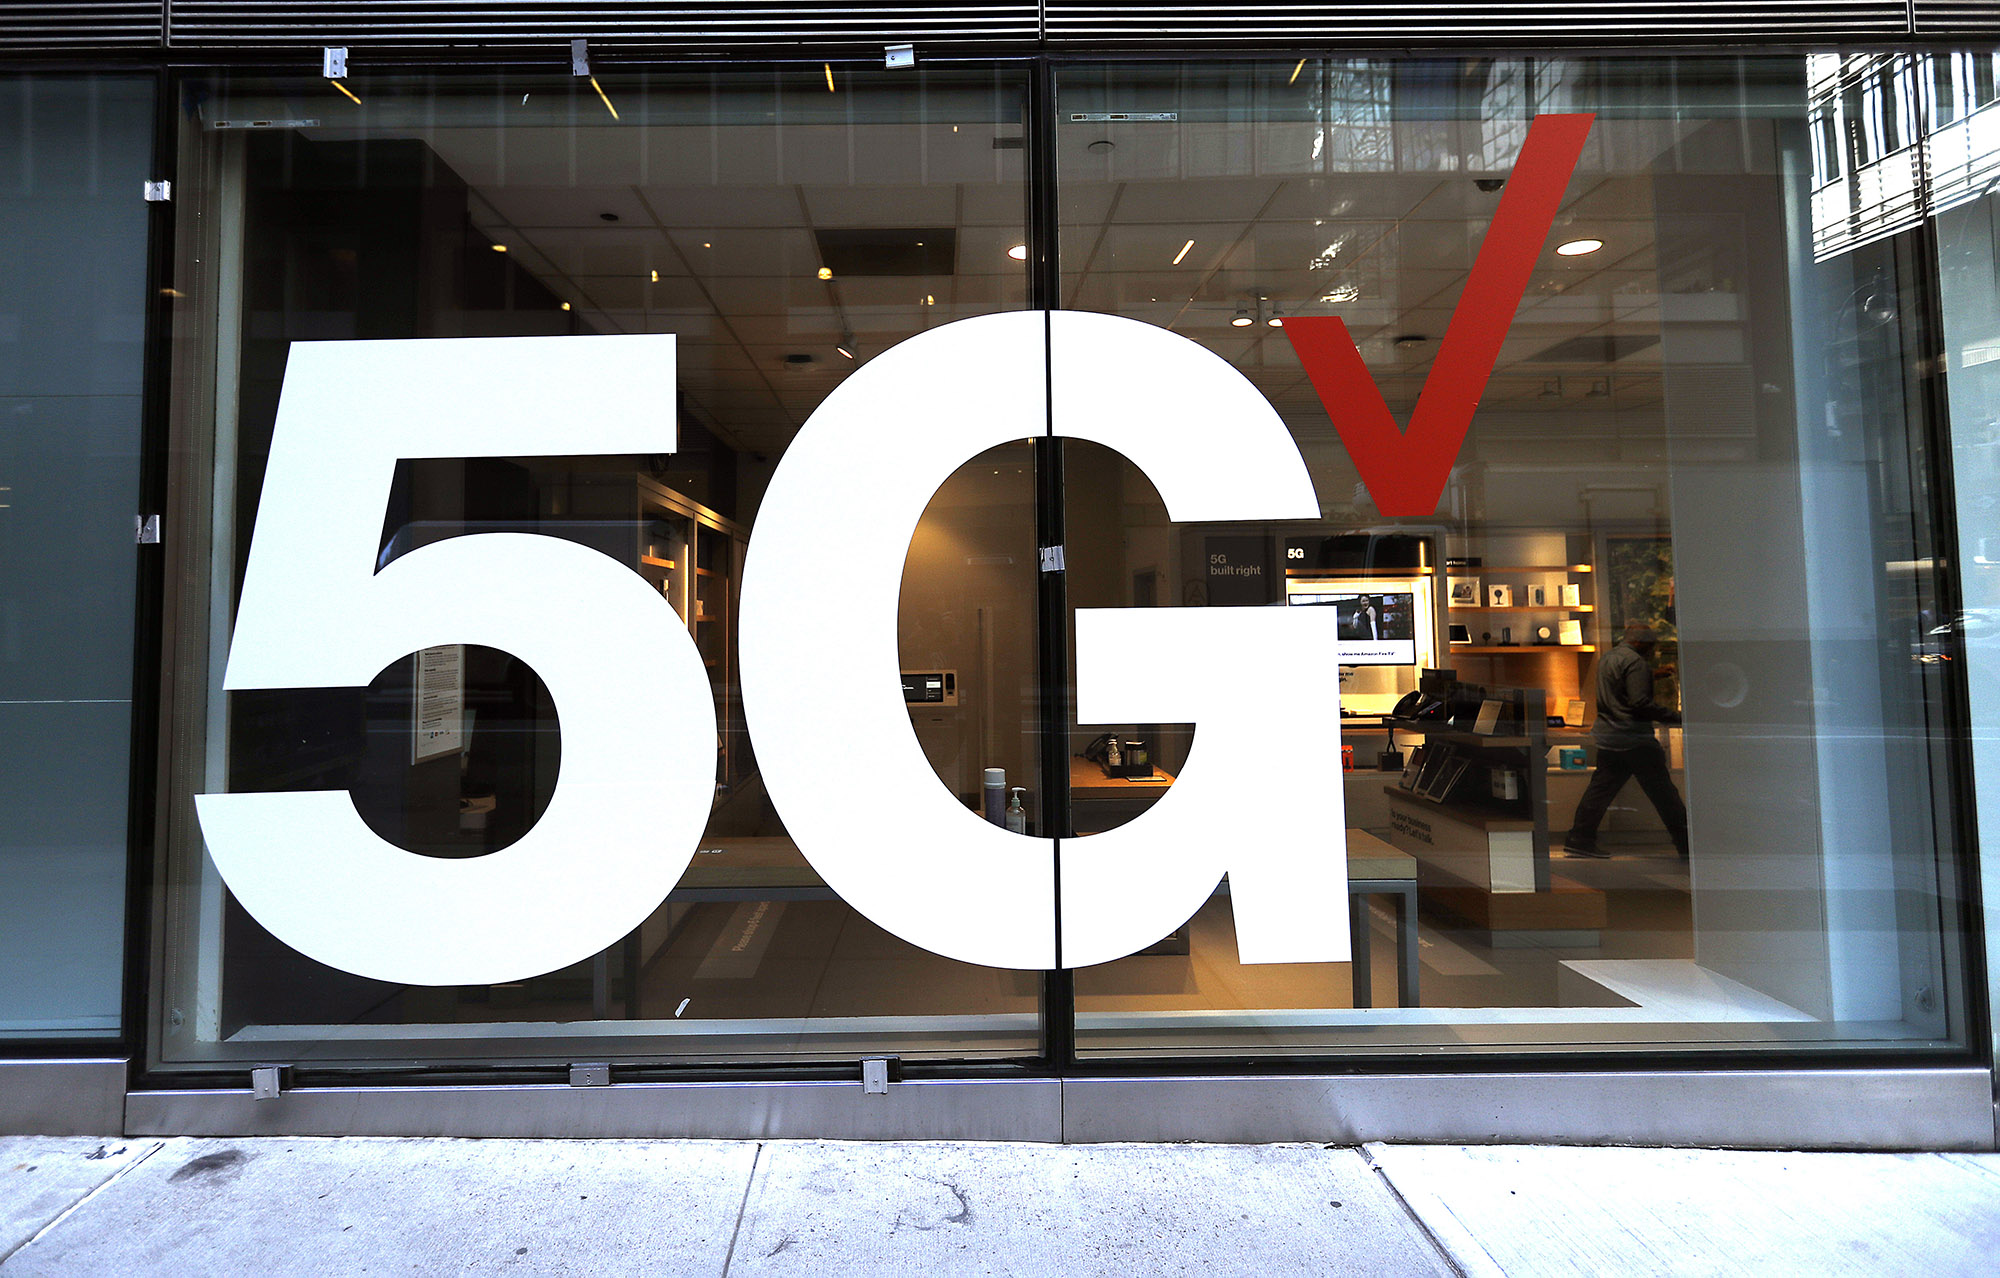 How fast is 5G? What you need to know about 5G speeds.